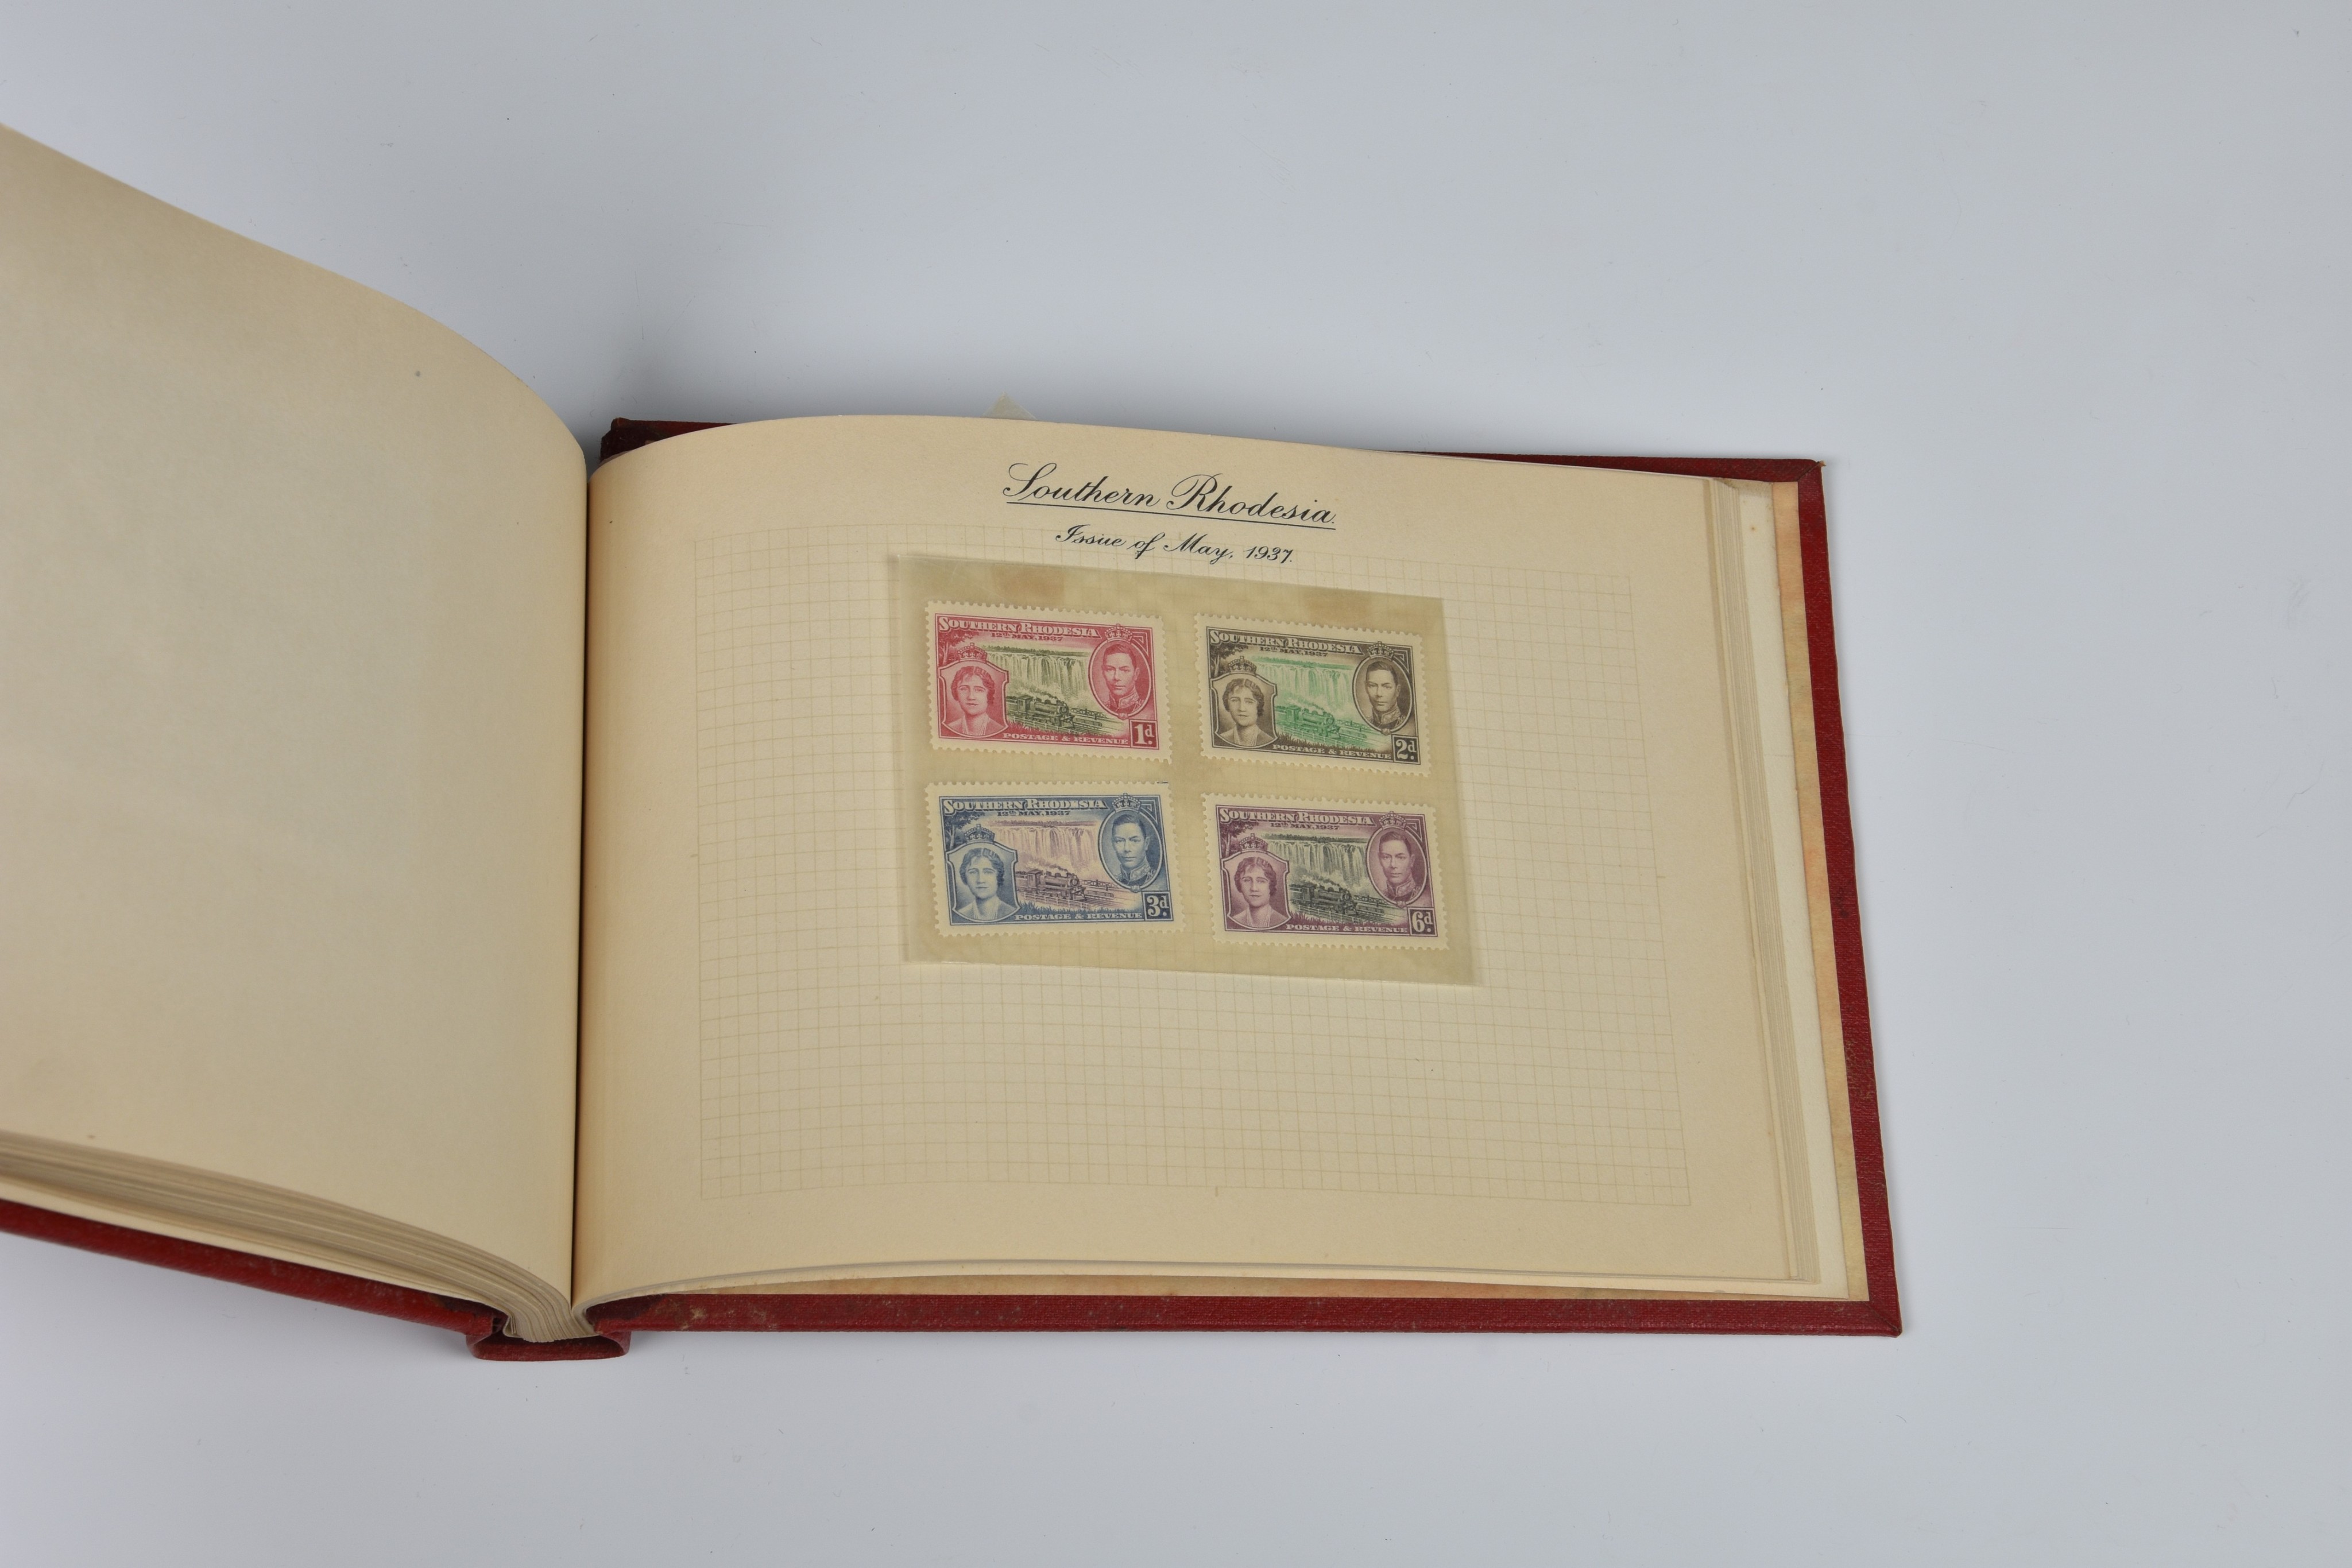 Philately interest - King George VI Coronation mint Commonwealth stamp collection, in 1937 F. G. - Image 3 of 5